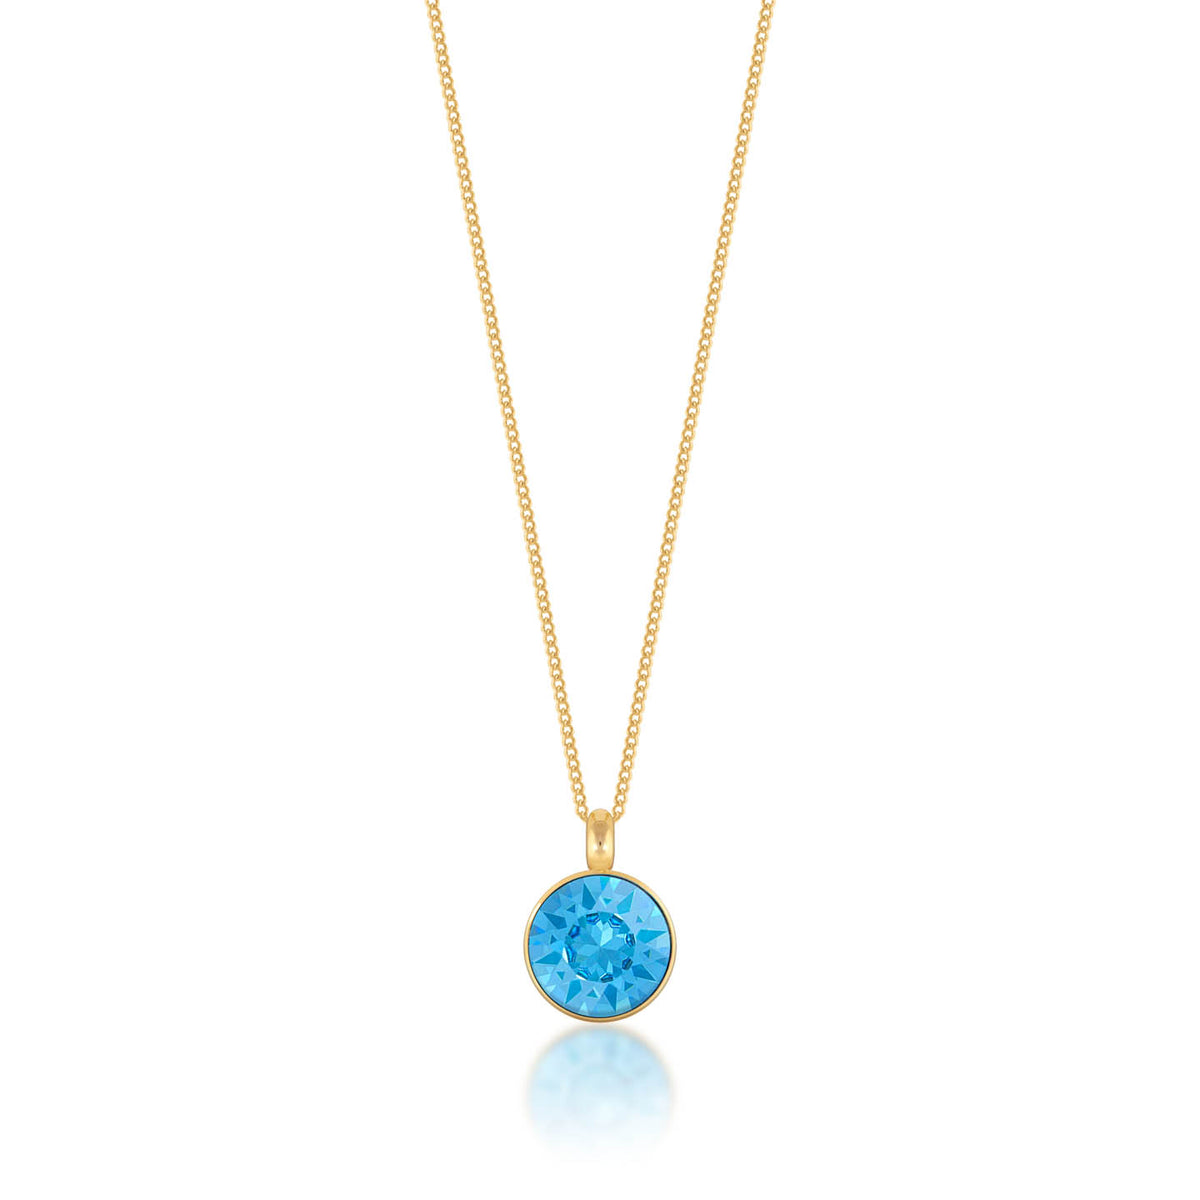 Bella Pendant Necklace with Blue Aquamarine Round Crystals from Swarovski Gold Plated - Ed Heart